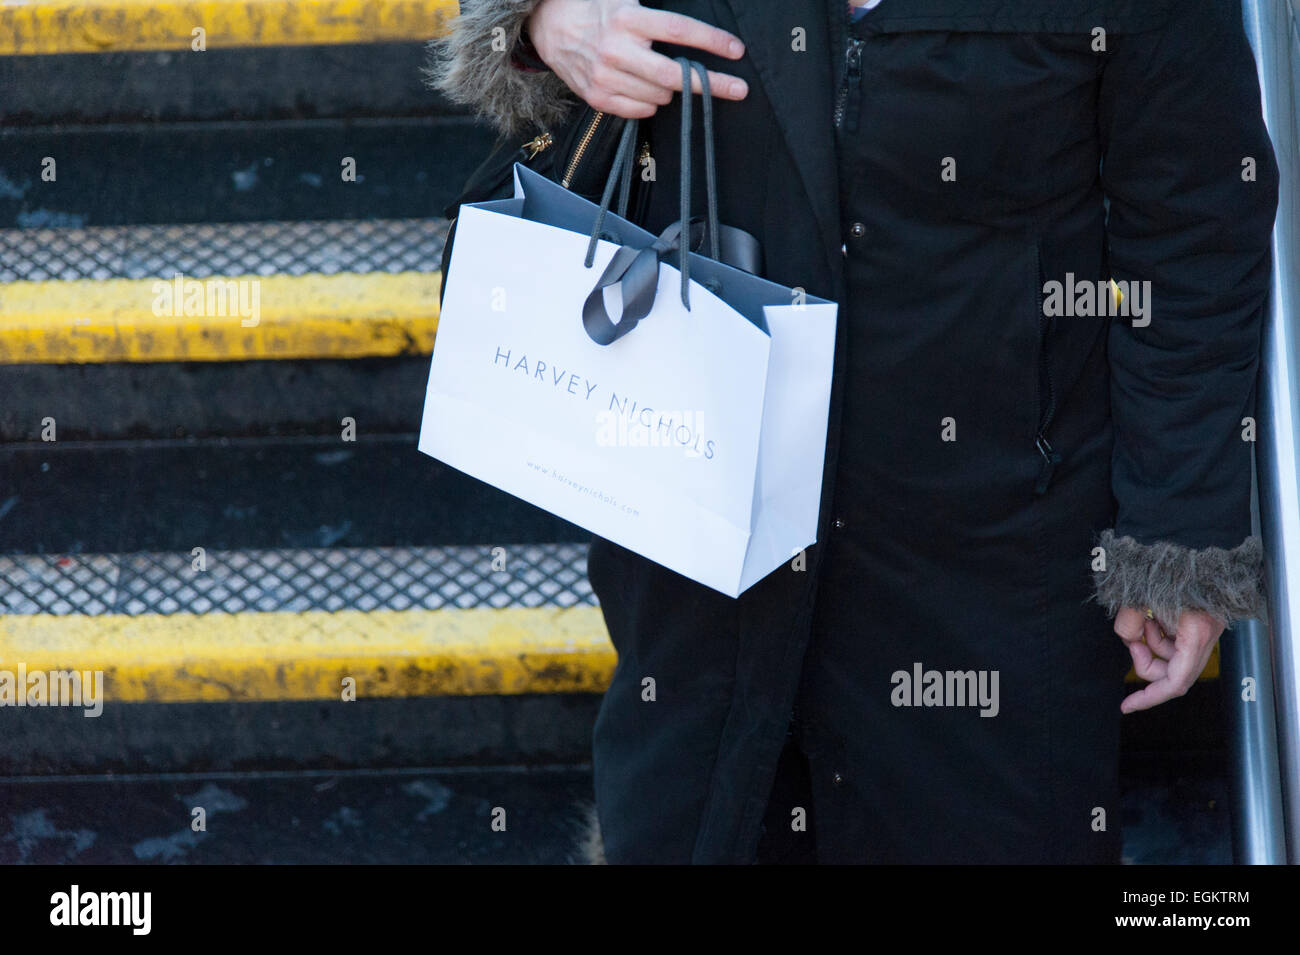 Female carrying Harvey Nichols bags outside the department store in Knightsbridge, London. Stock Photo